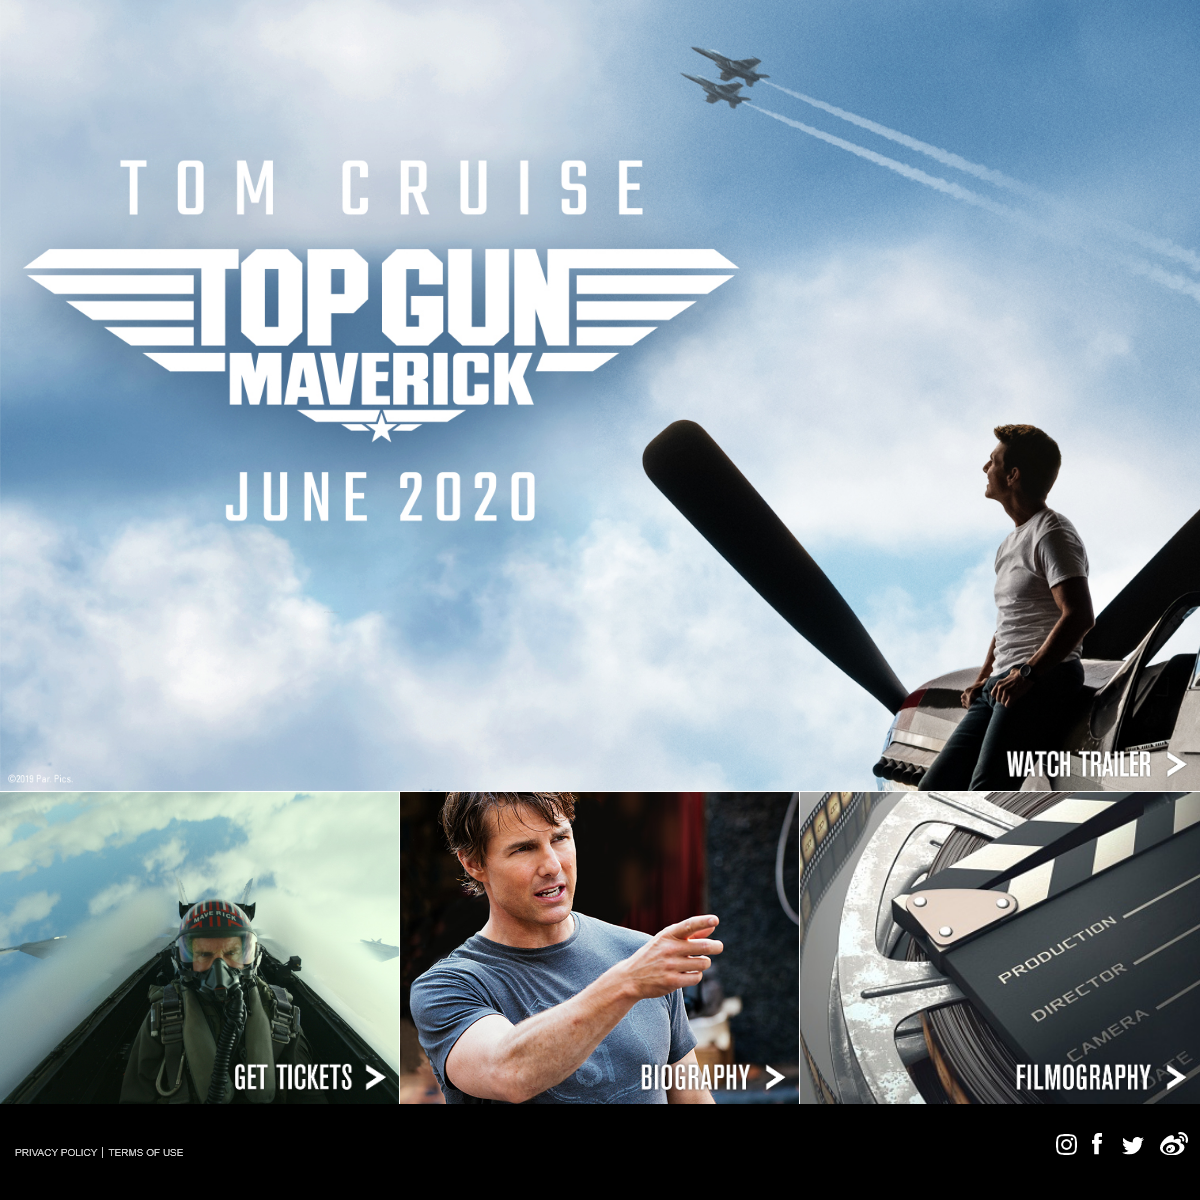 A complete backup of tomcruise.com